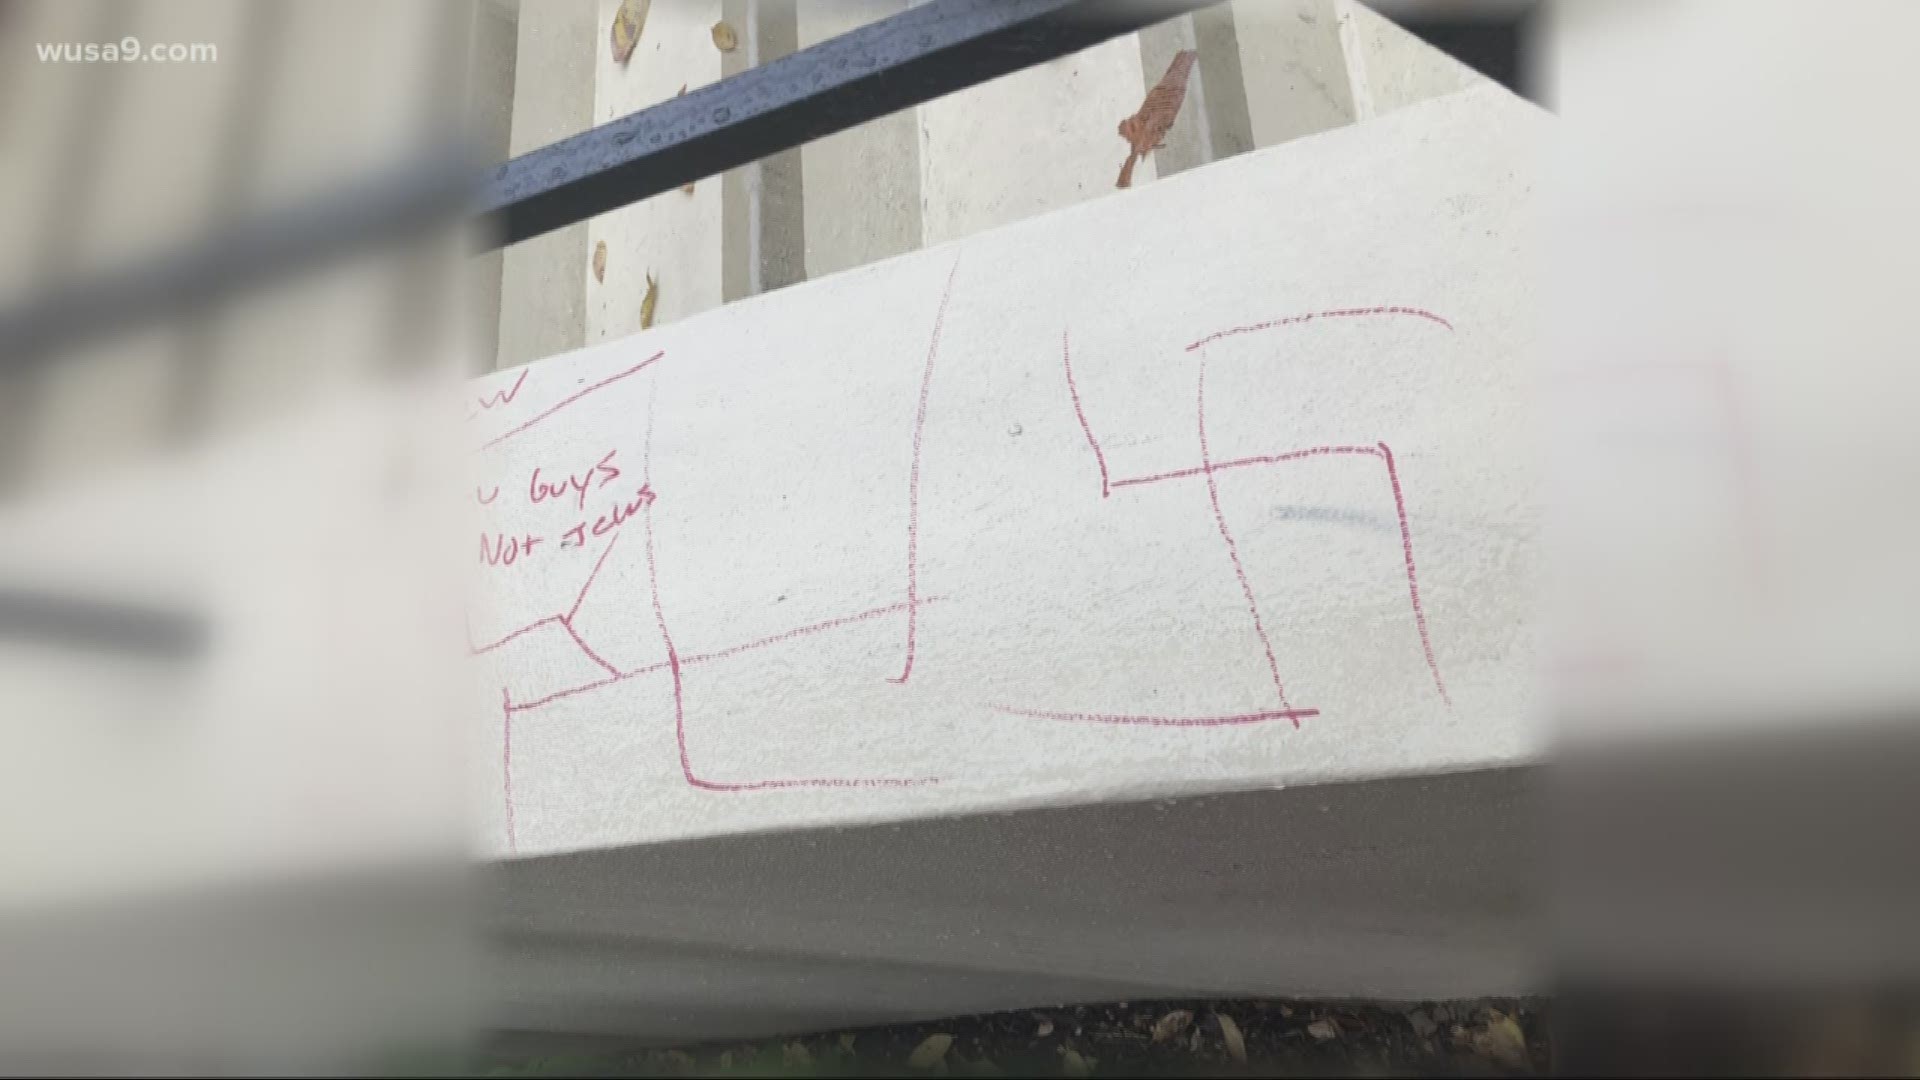 Police said anti-Semitic gestures and symbols were carved in multiple places throughout Sixth and I synagogue, one of the oldest Jewish landmarks in D.C.